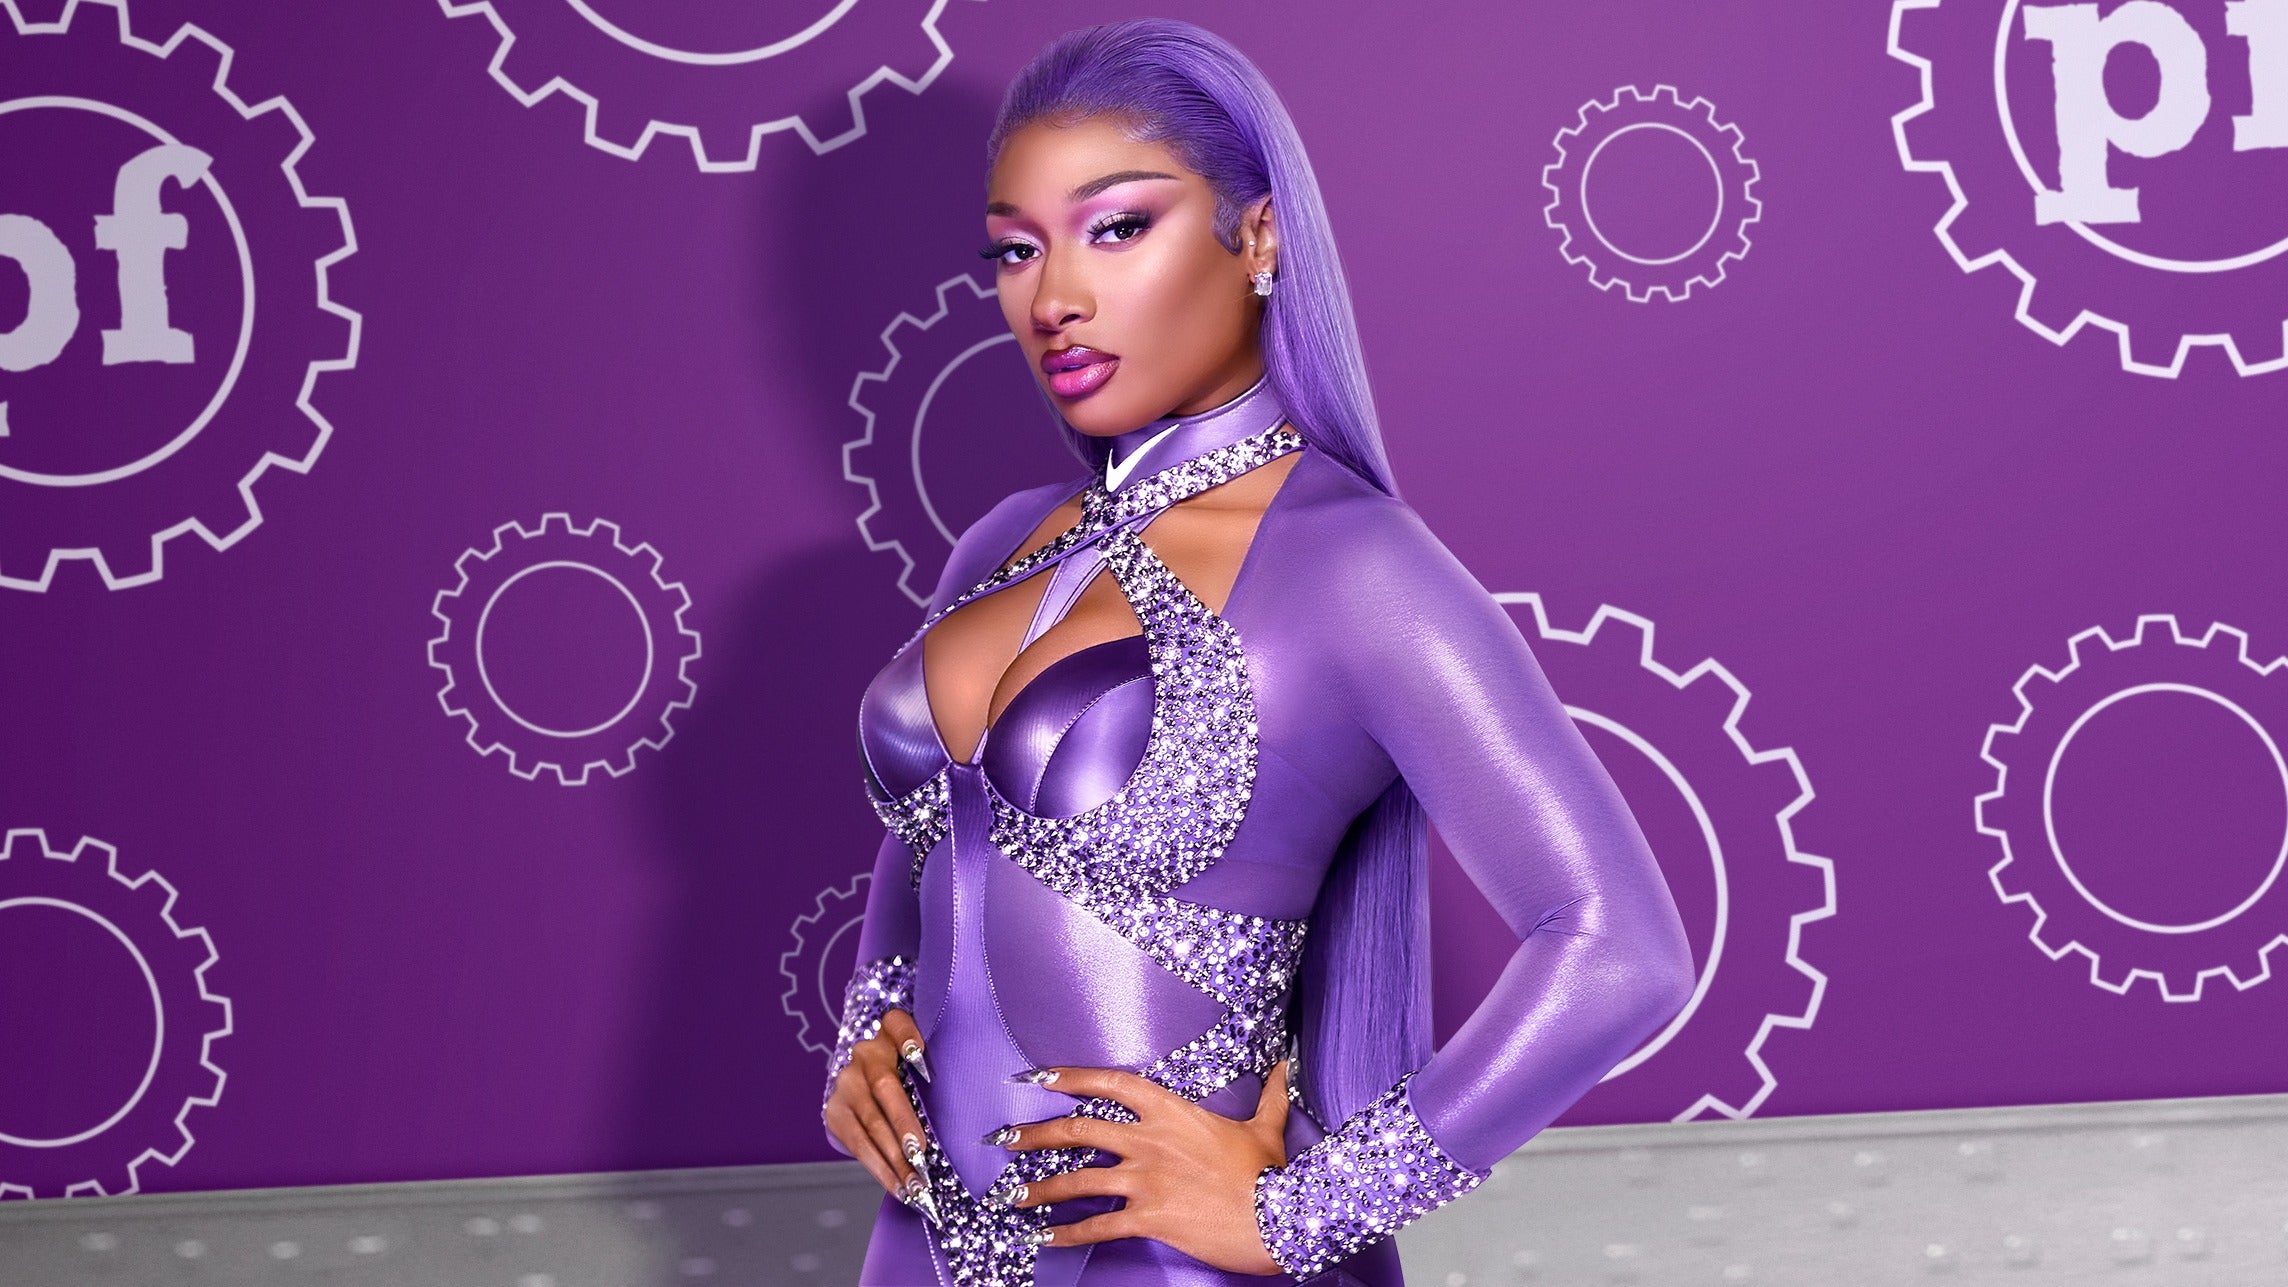 Megan Thee Stallion And Planet Fitness Announce New Partnership With A Merch Collection